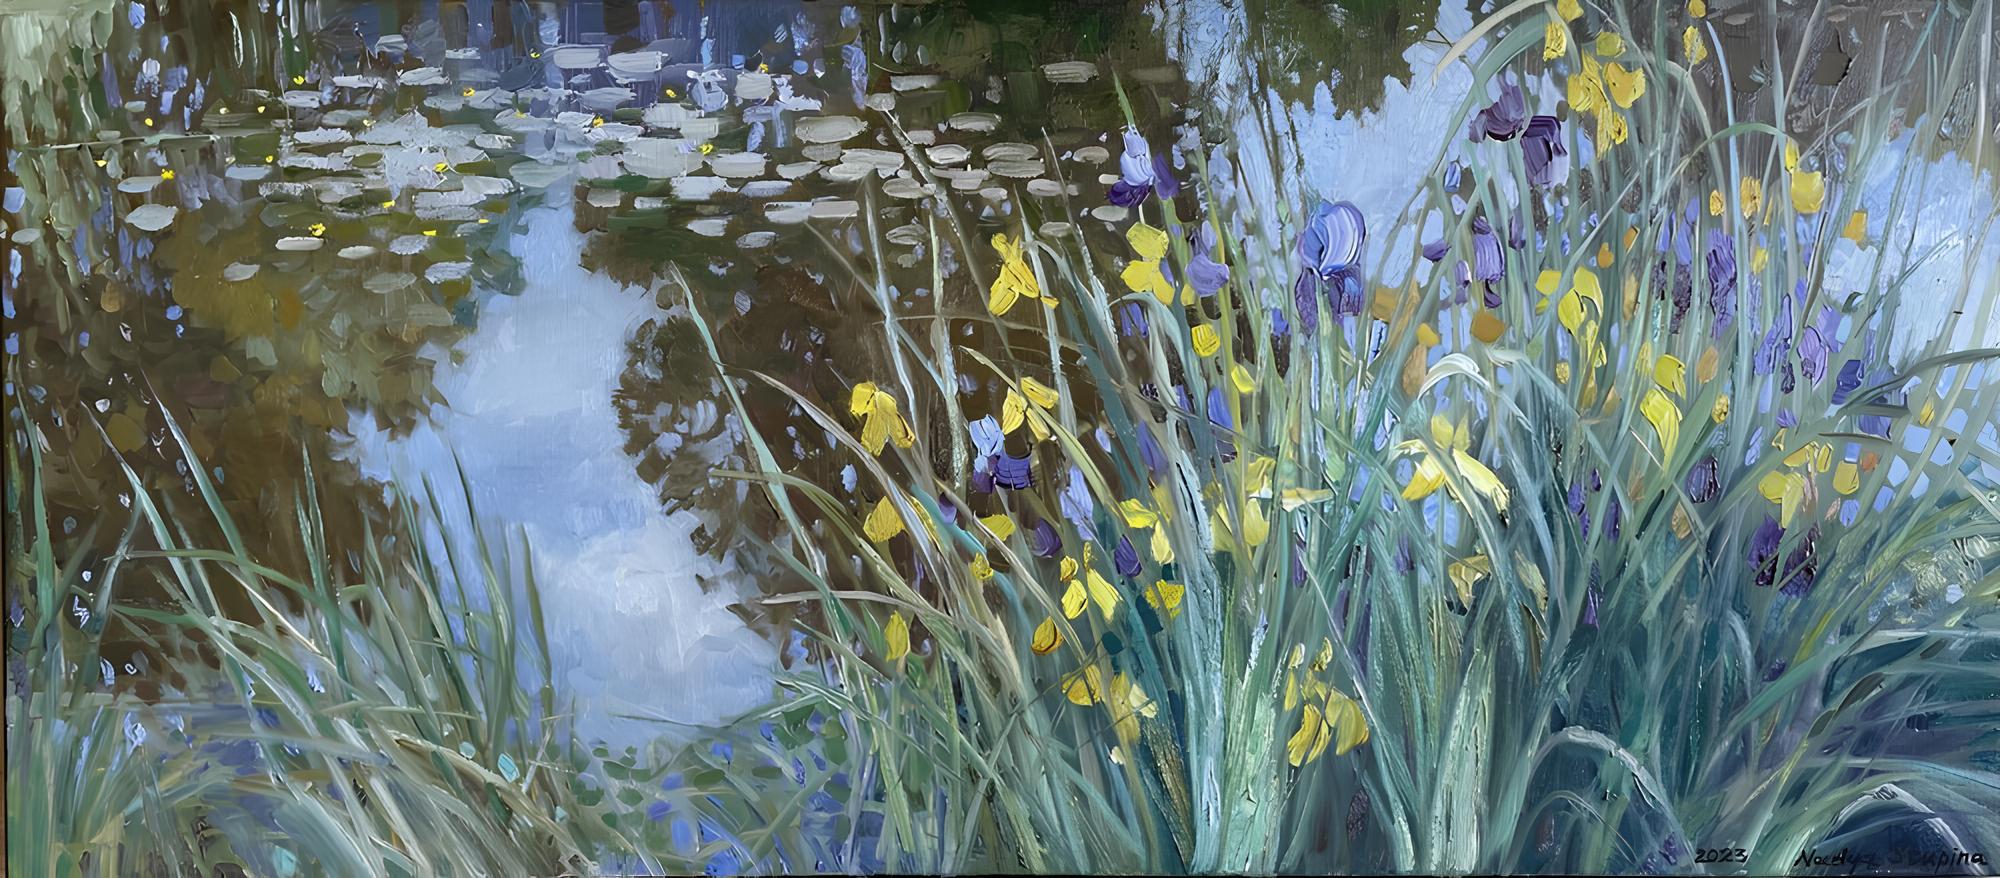 Nadezda Stupina Landscape Painting - A pond with water lilies and irises 4